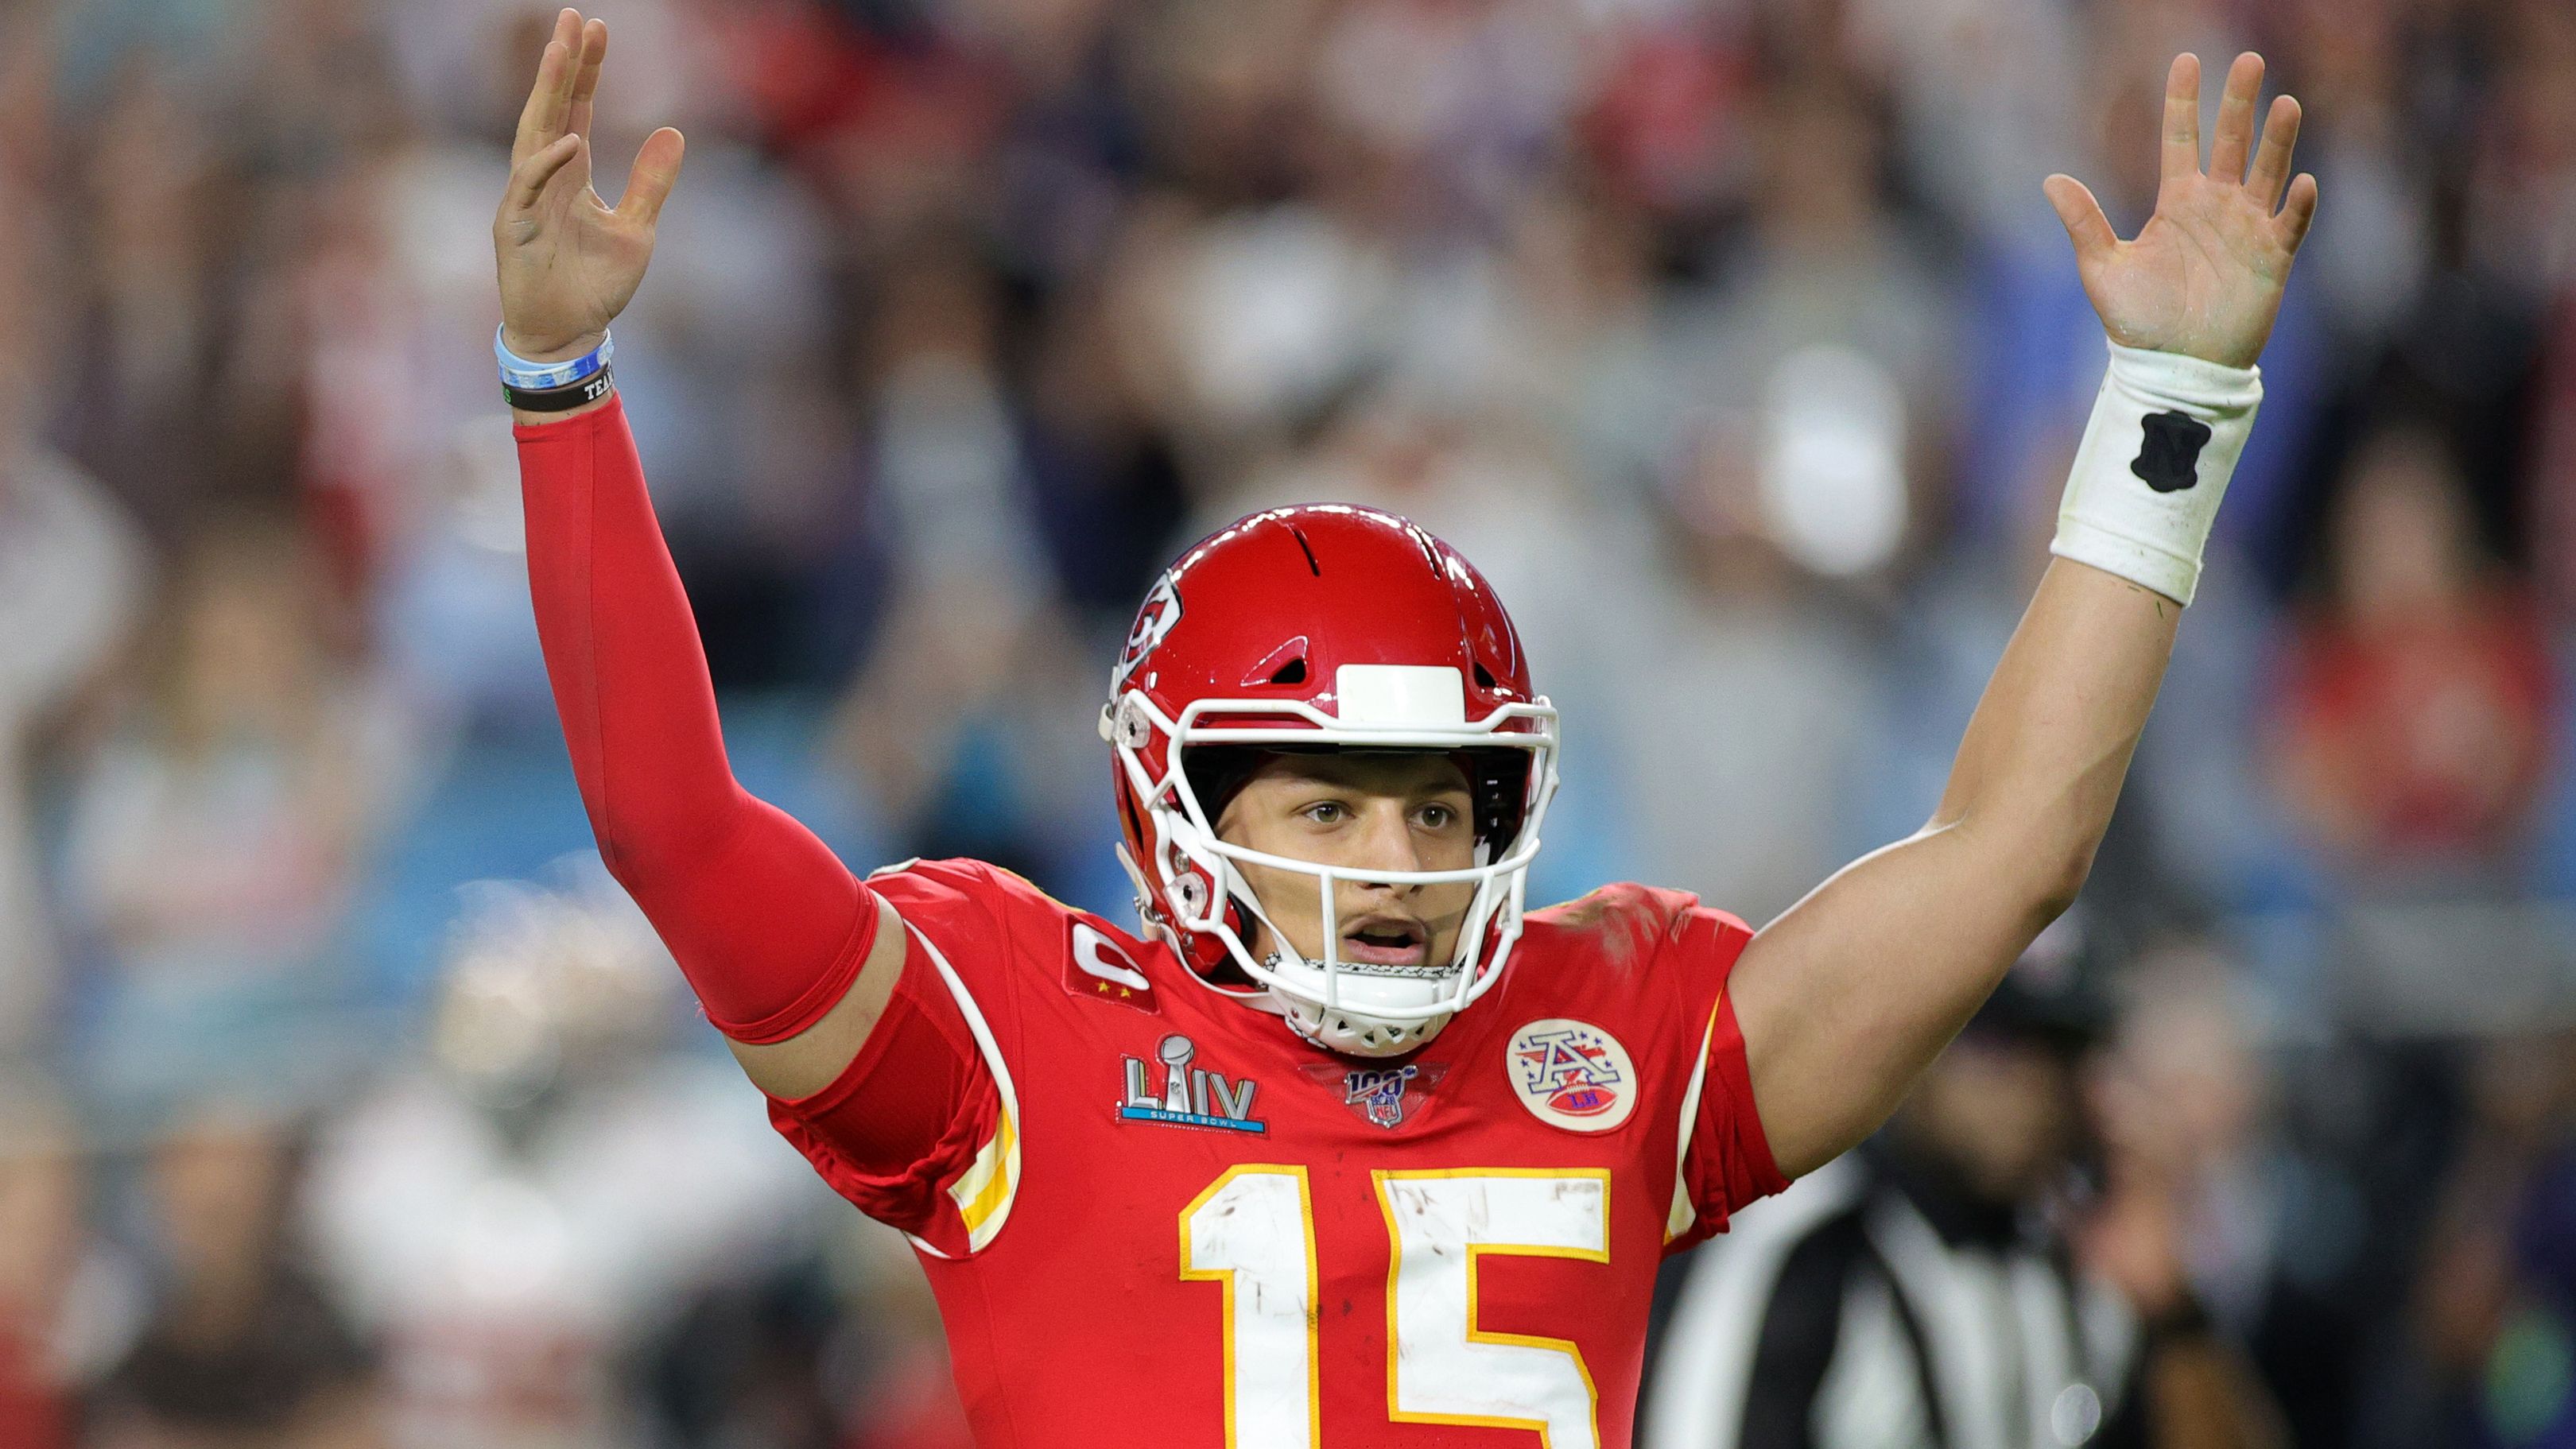 Patrick Mahomes celebrates throwing a touchdown pass in Super Bowl LIV.